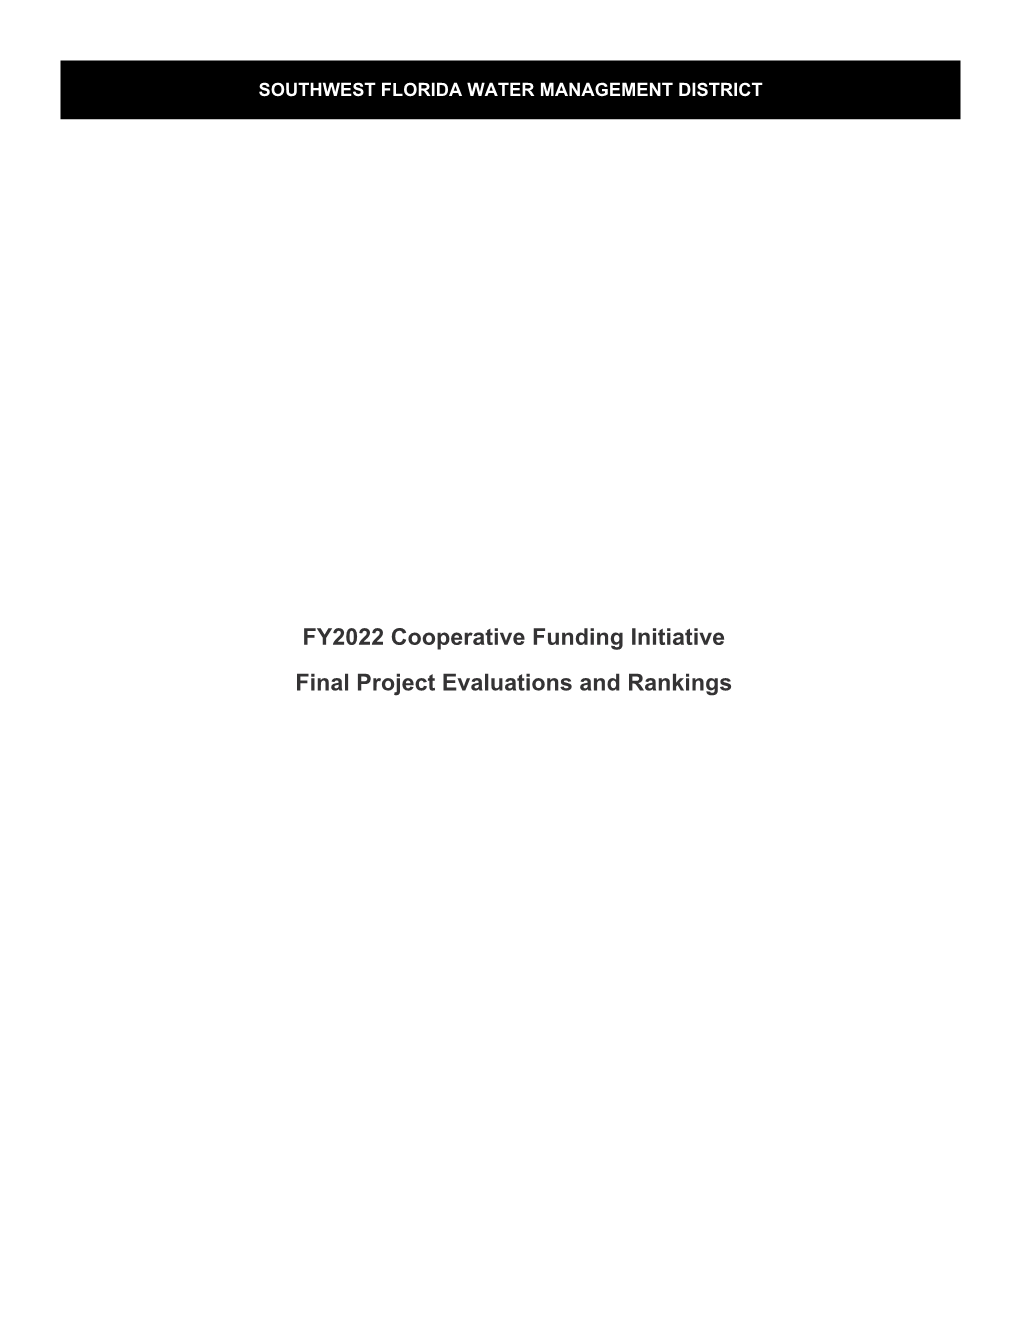 FY2022 Cooperative Funding Initiative Final Project Evaluations And